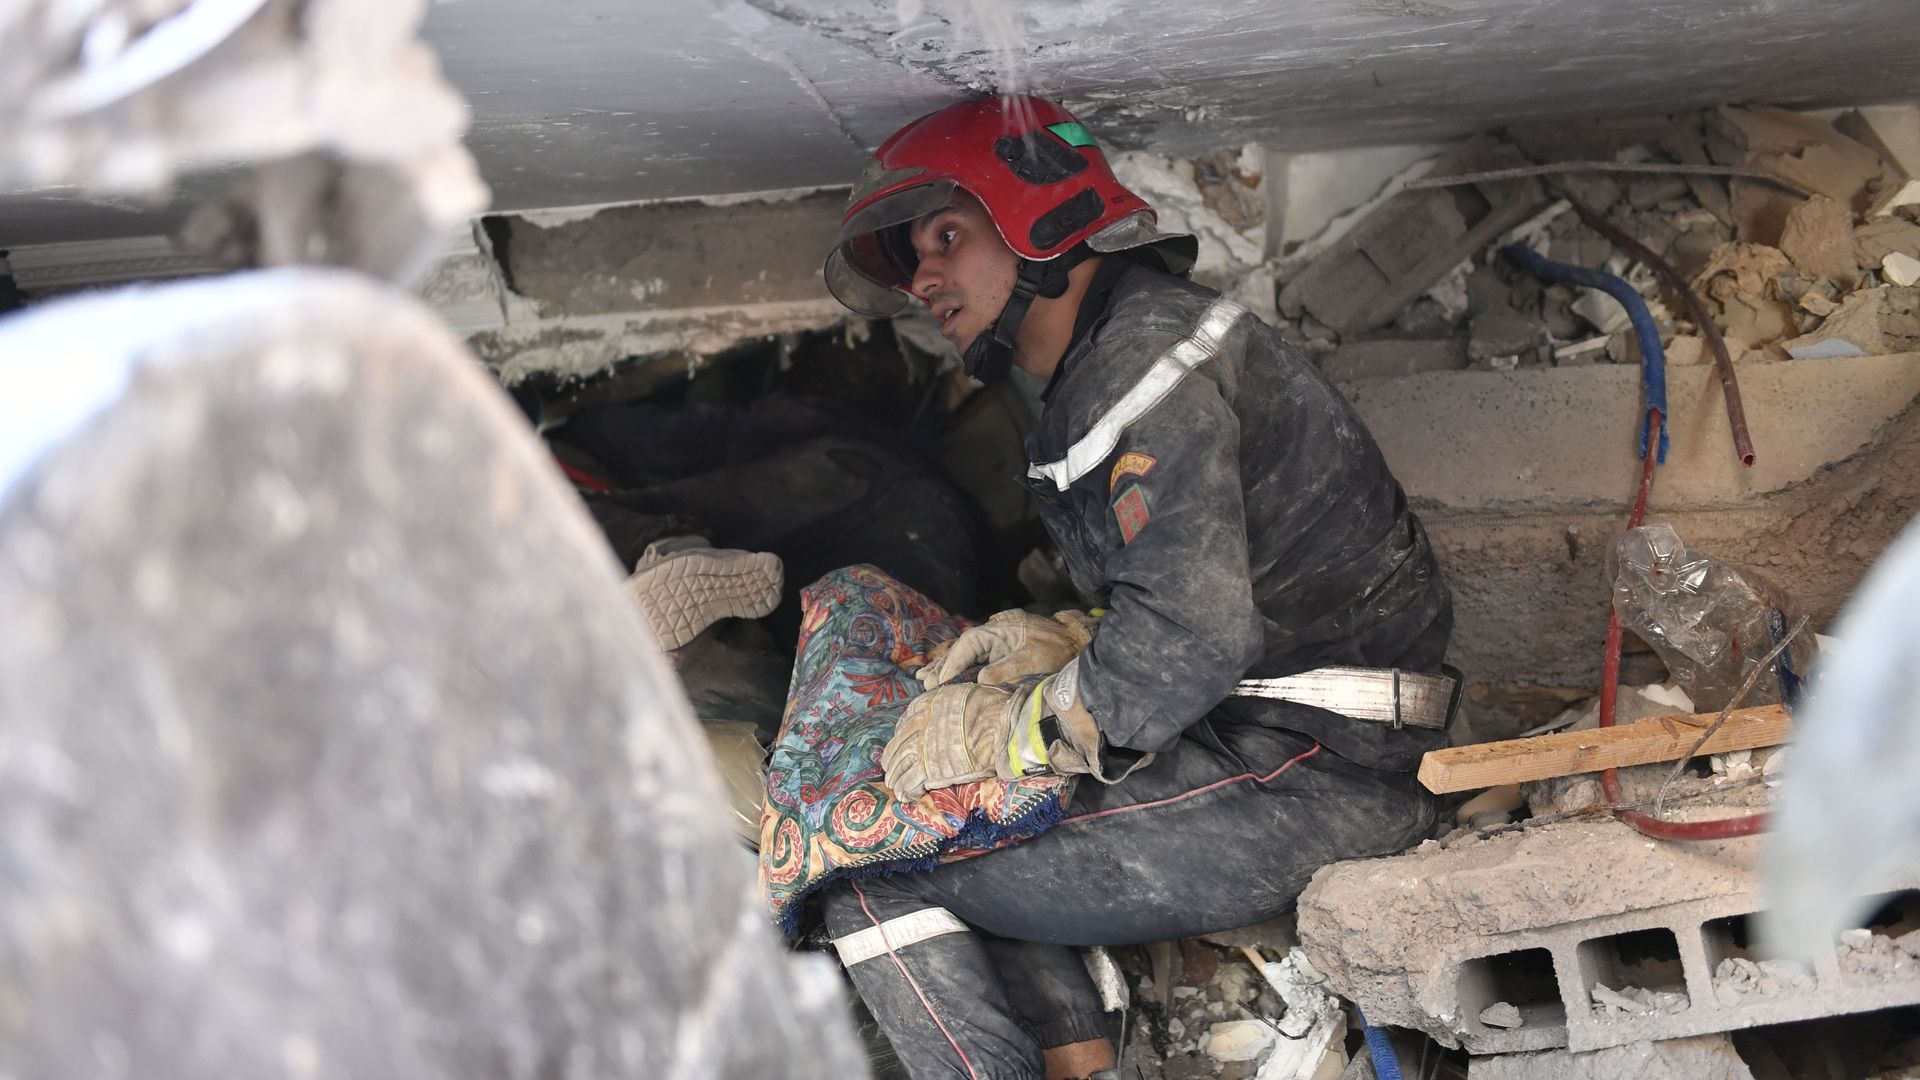 A rescue worker searches the debris in Morocco's Marrakech after a powerful quake struck the region. Photo: Abu Adem Muhammed/Anadolu Agency via Getty Images)